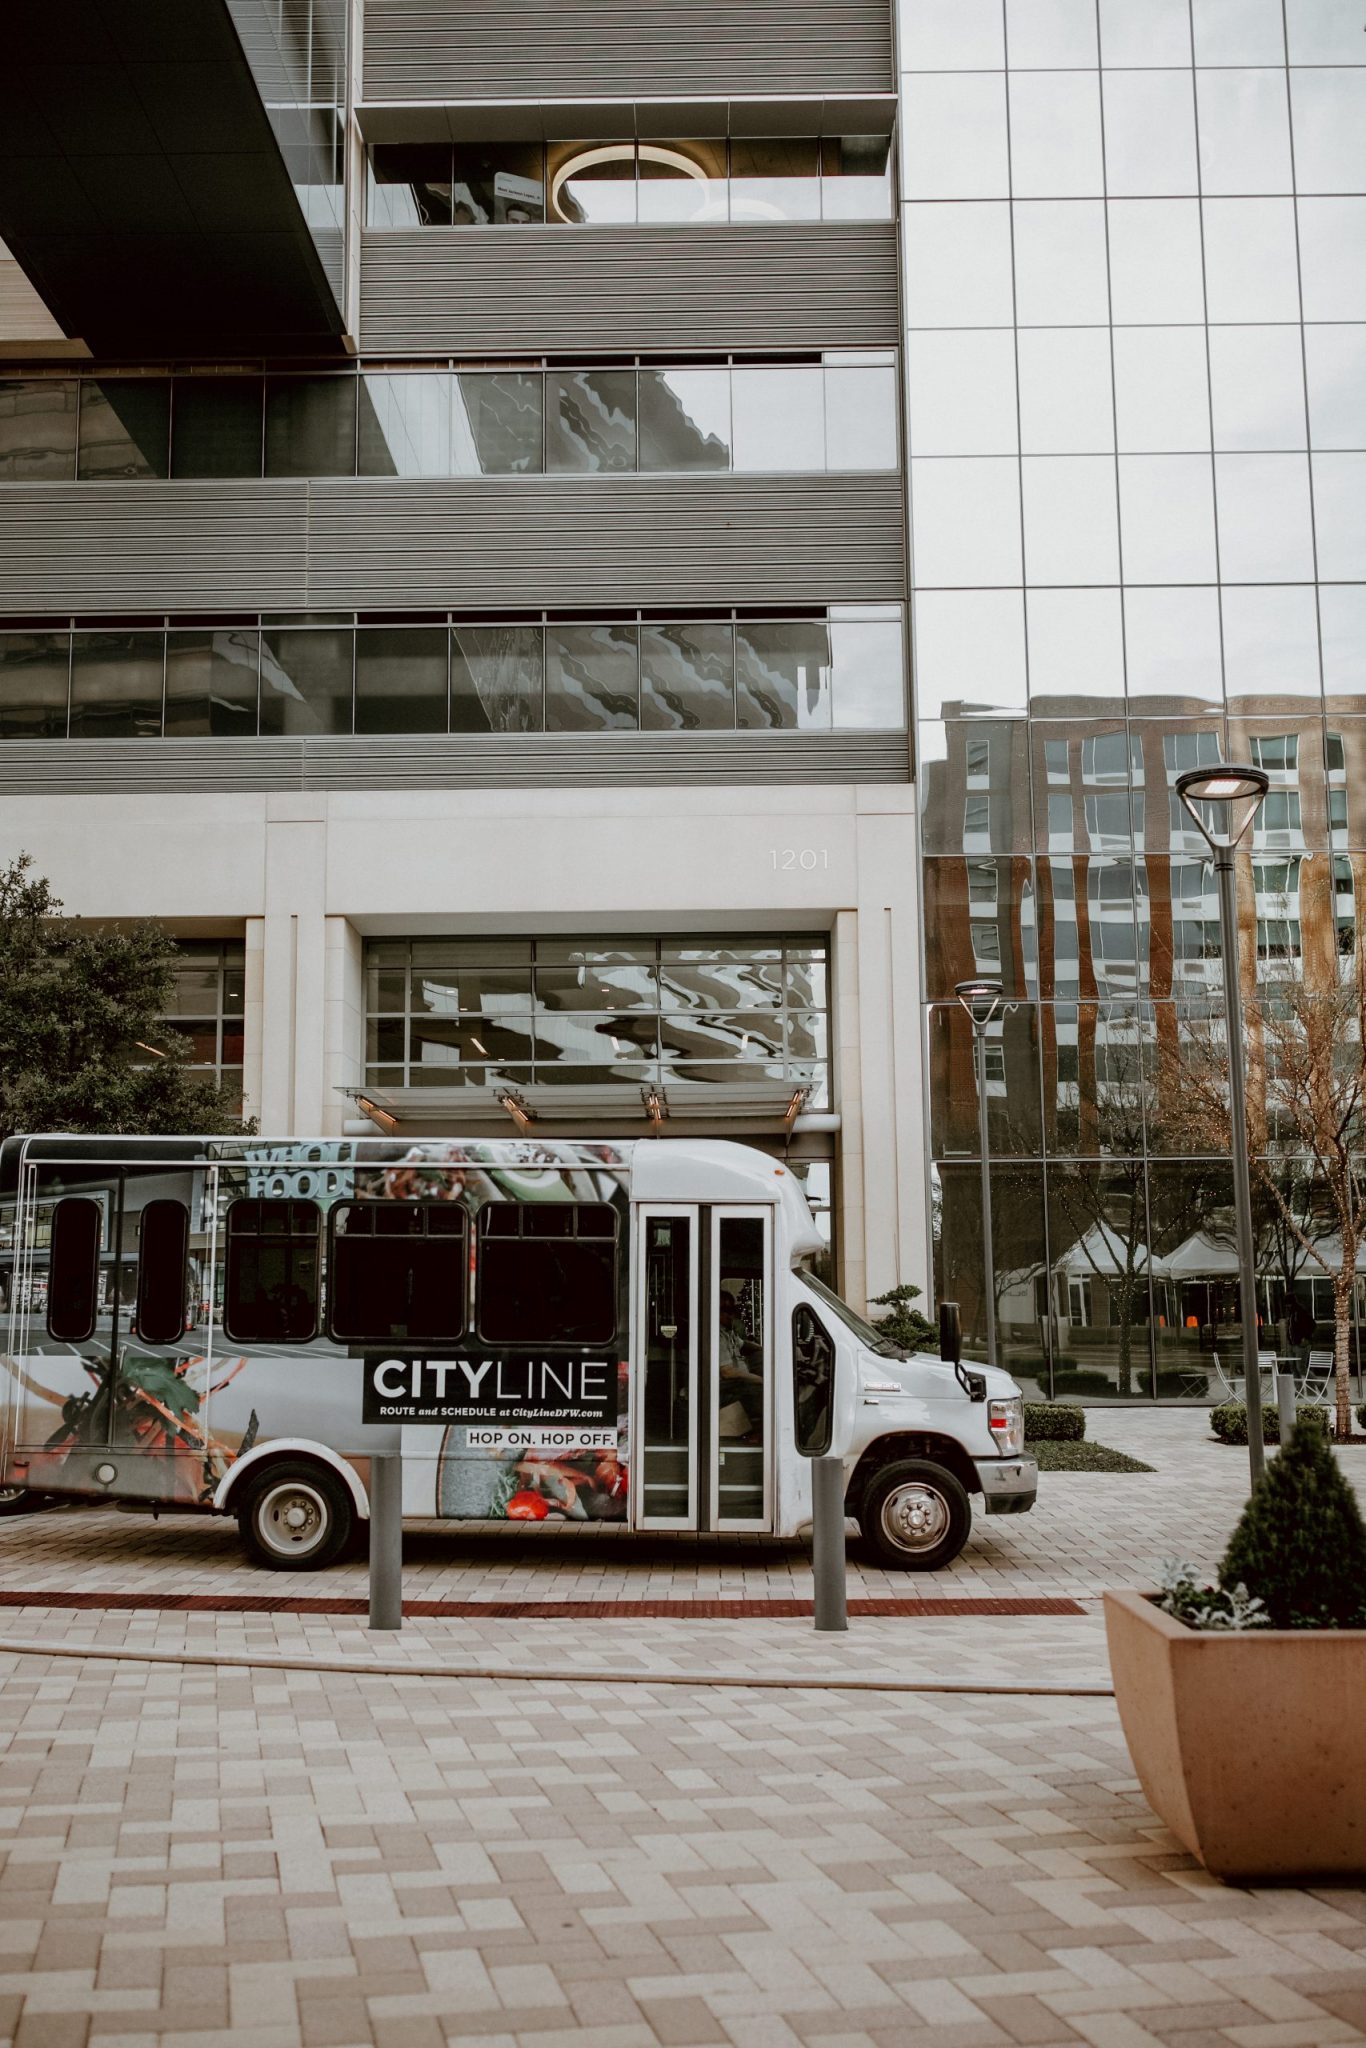 Take a free shuttle from CD to CityLine for lunch or happy hour